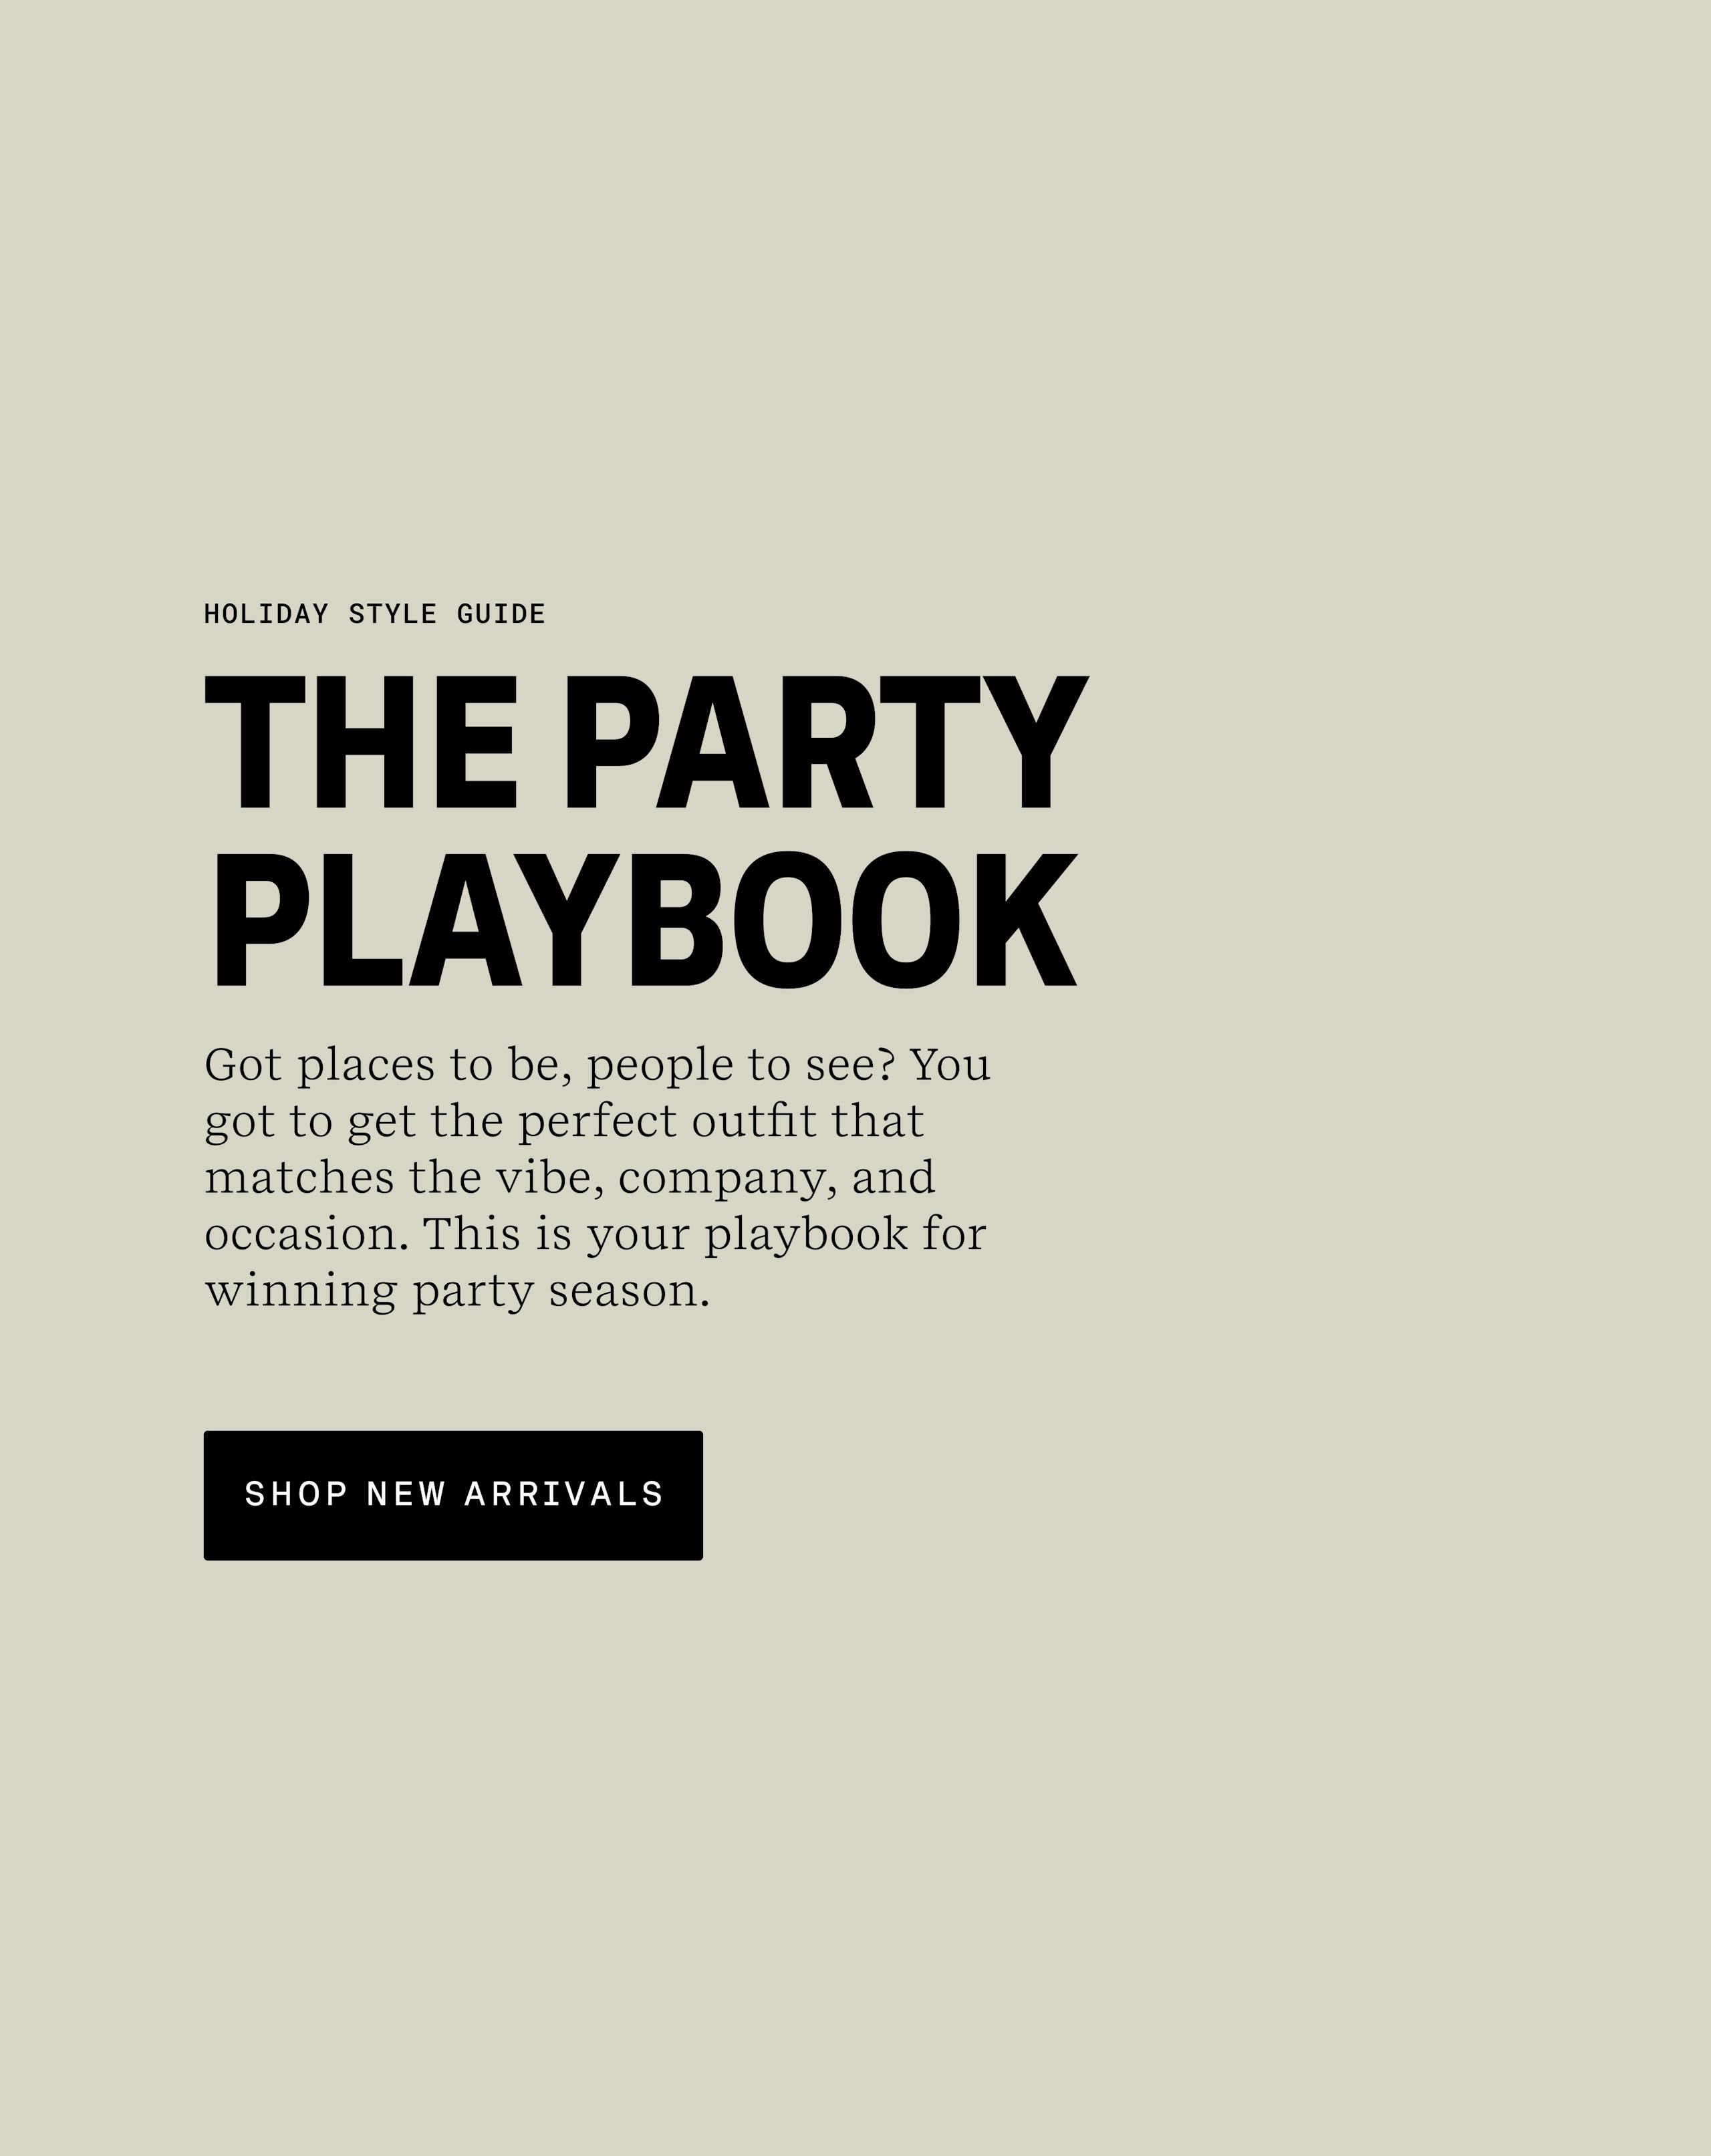 HOLIDAY STYLE GUIDE | THE PARTY PLAYBOOK |Got places to be, people to see? Yout got to get the perfect outfit that matches the vibe, company, and occasion. This is your playbook for winning party season. | Shop New Arrivals